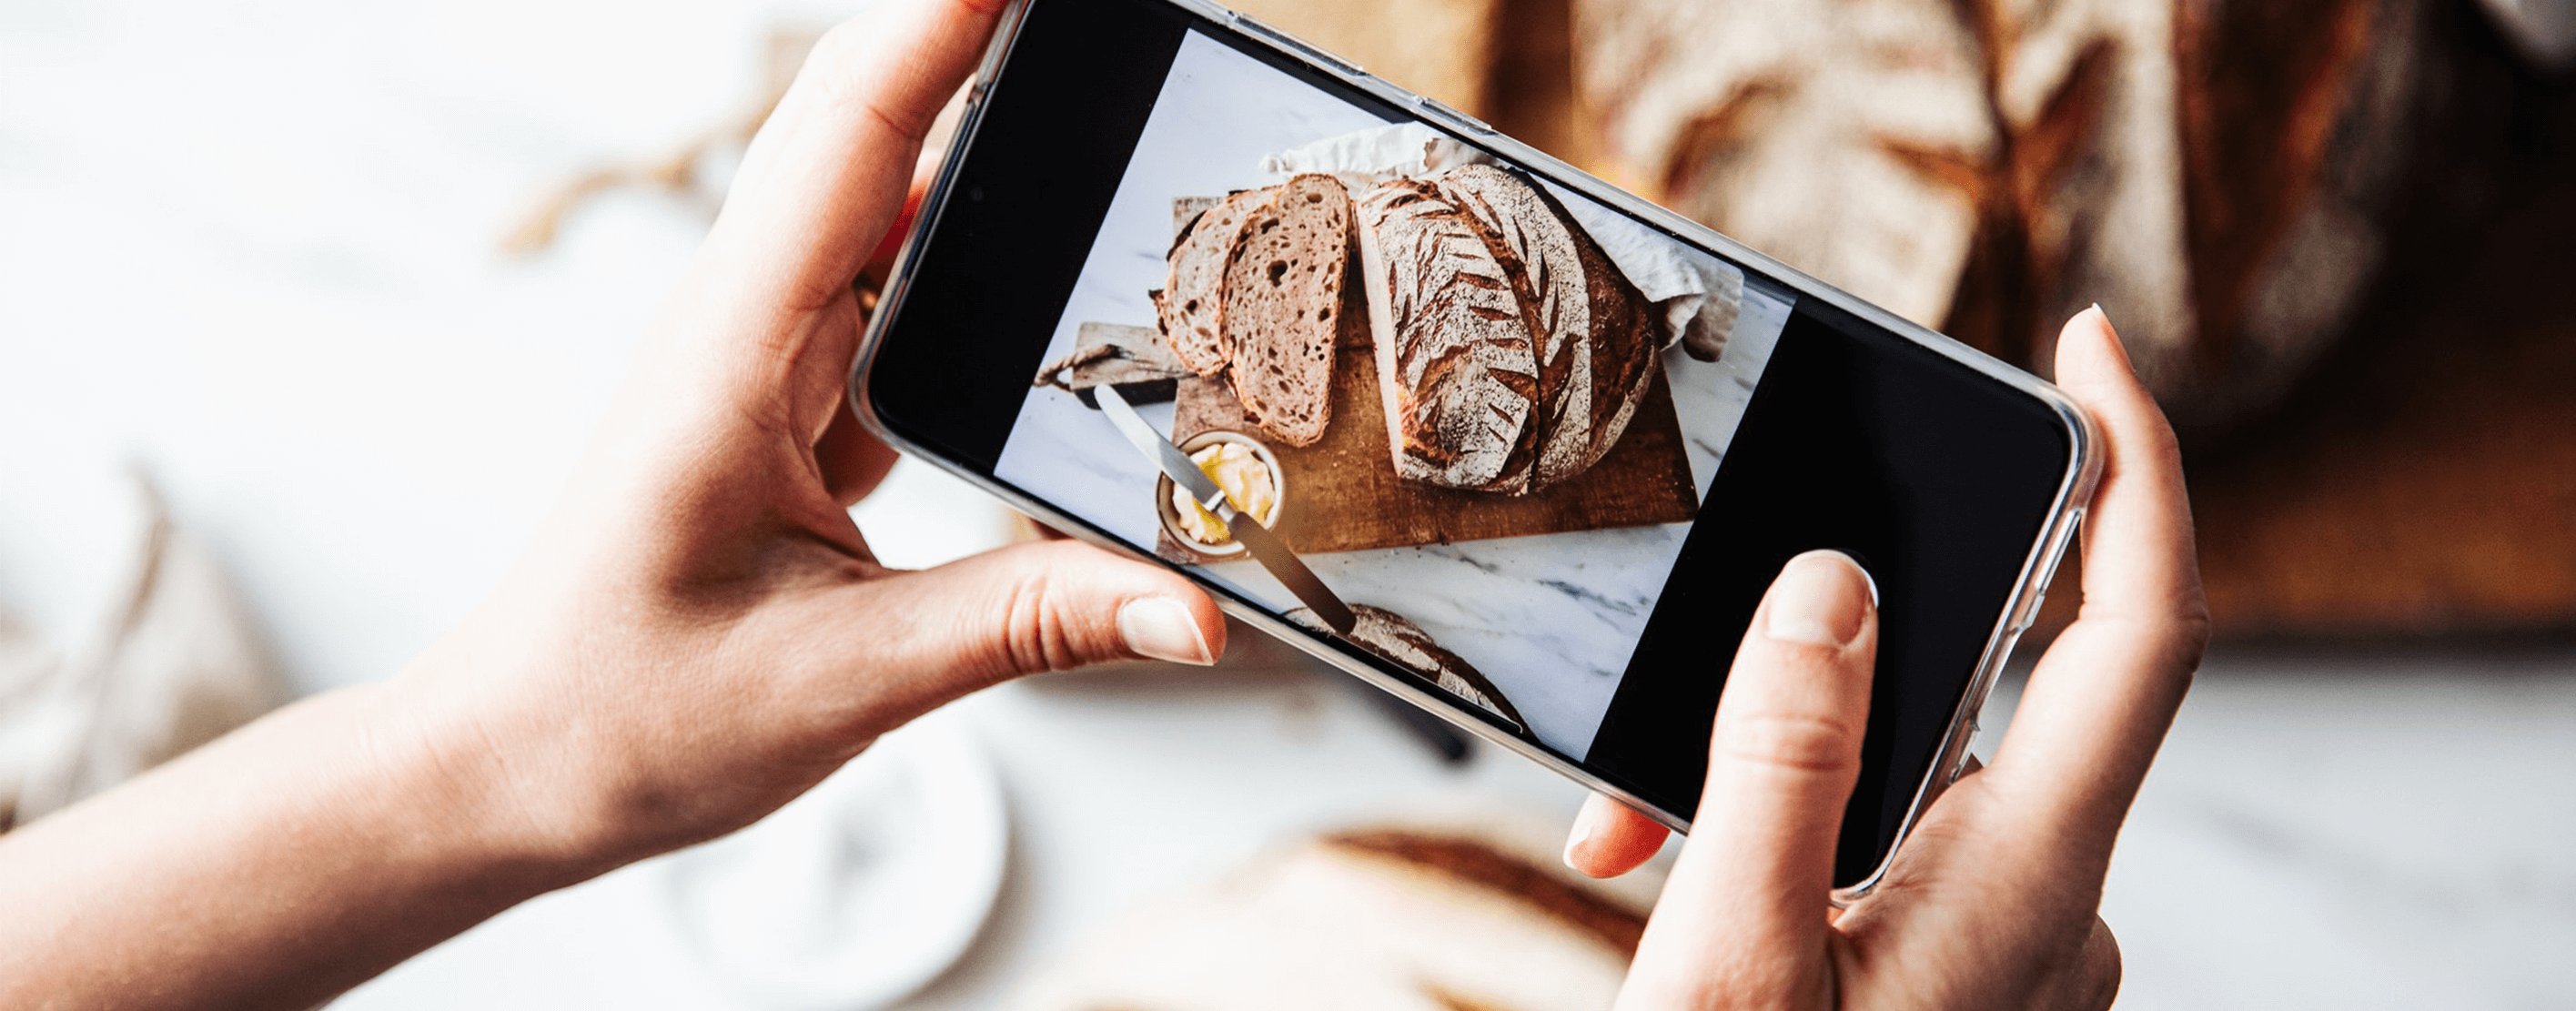 A Person Taking A Picture Of Freshly Baked Bread